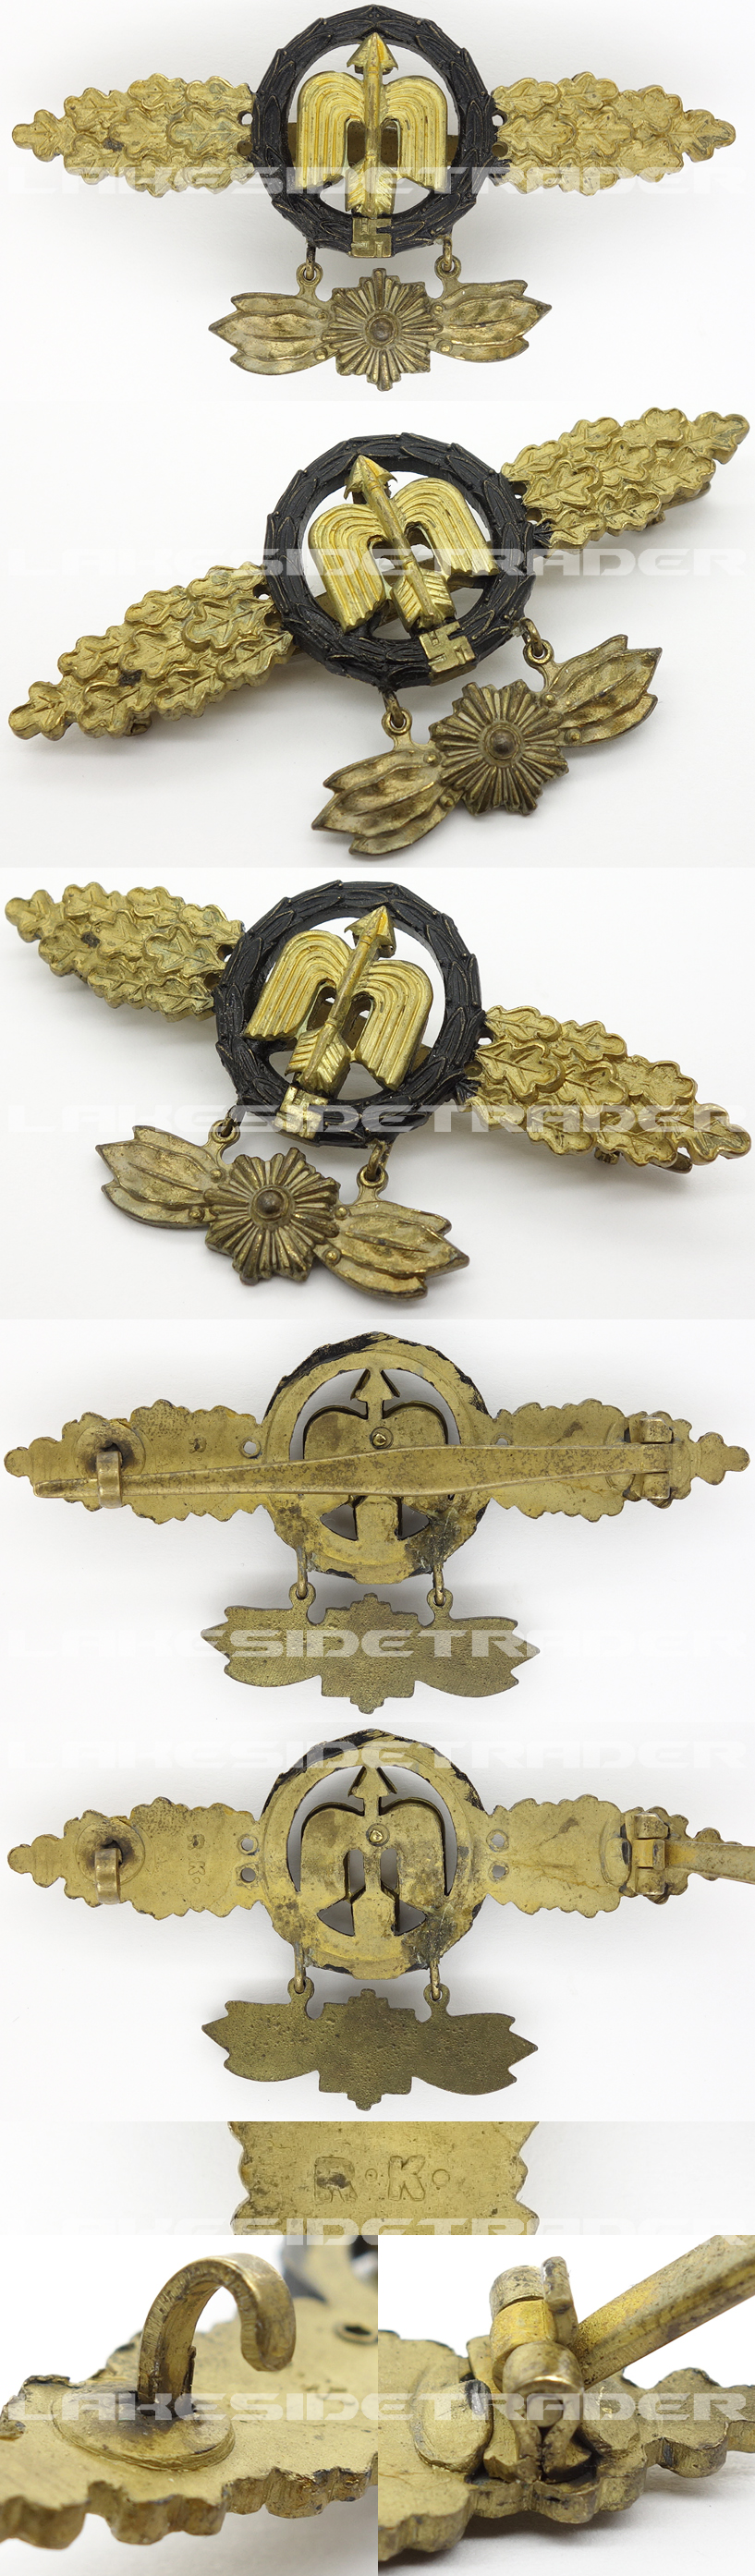 Short Range Night Fighter Clasp in Gold with Pennant by RK